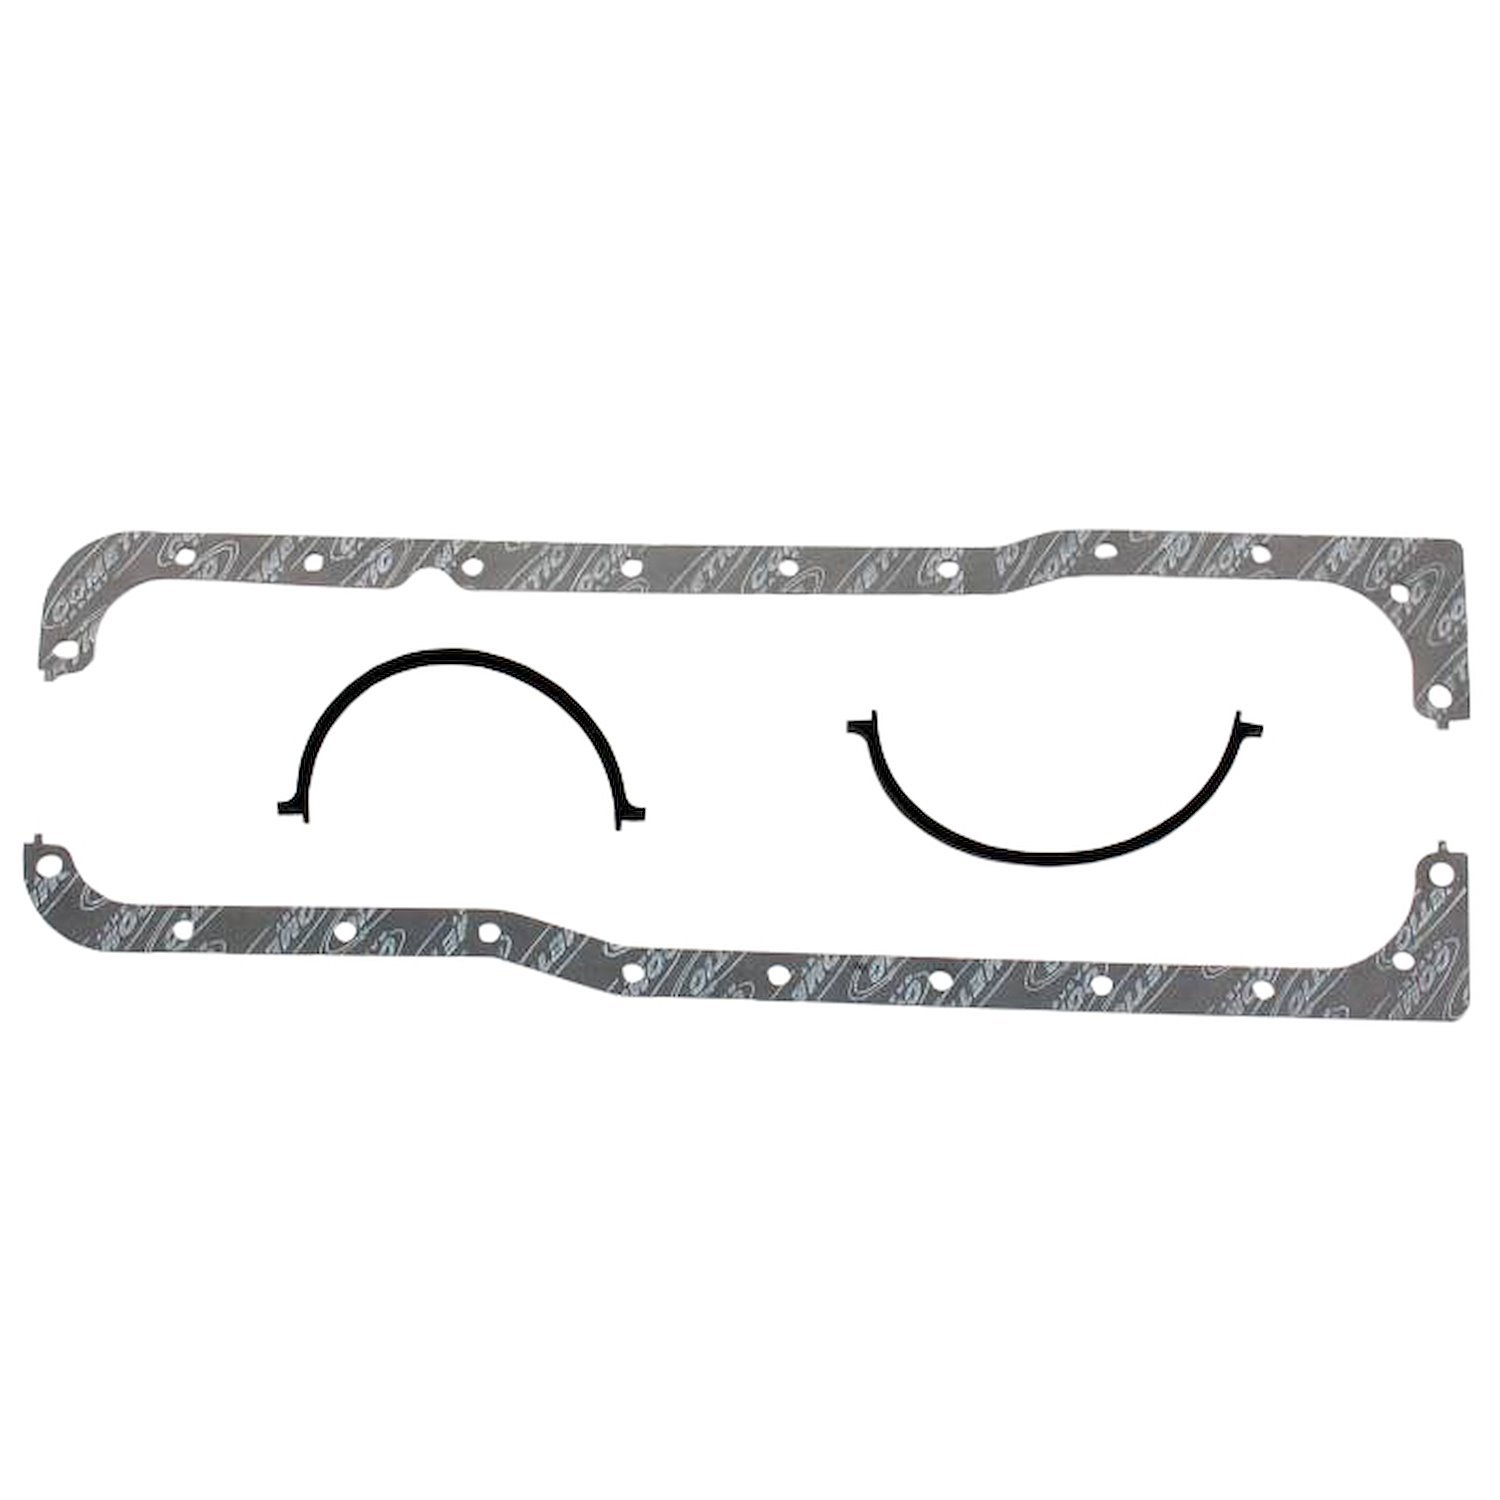 Oil Pan Gasket for Ford 351W Engine